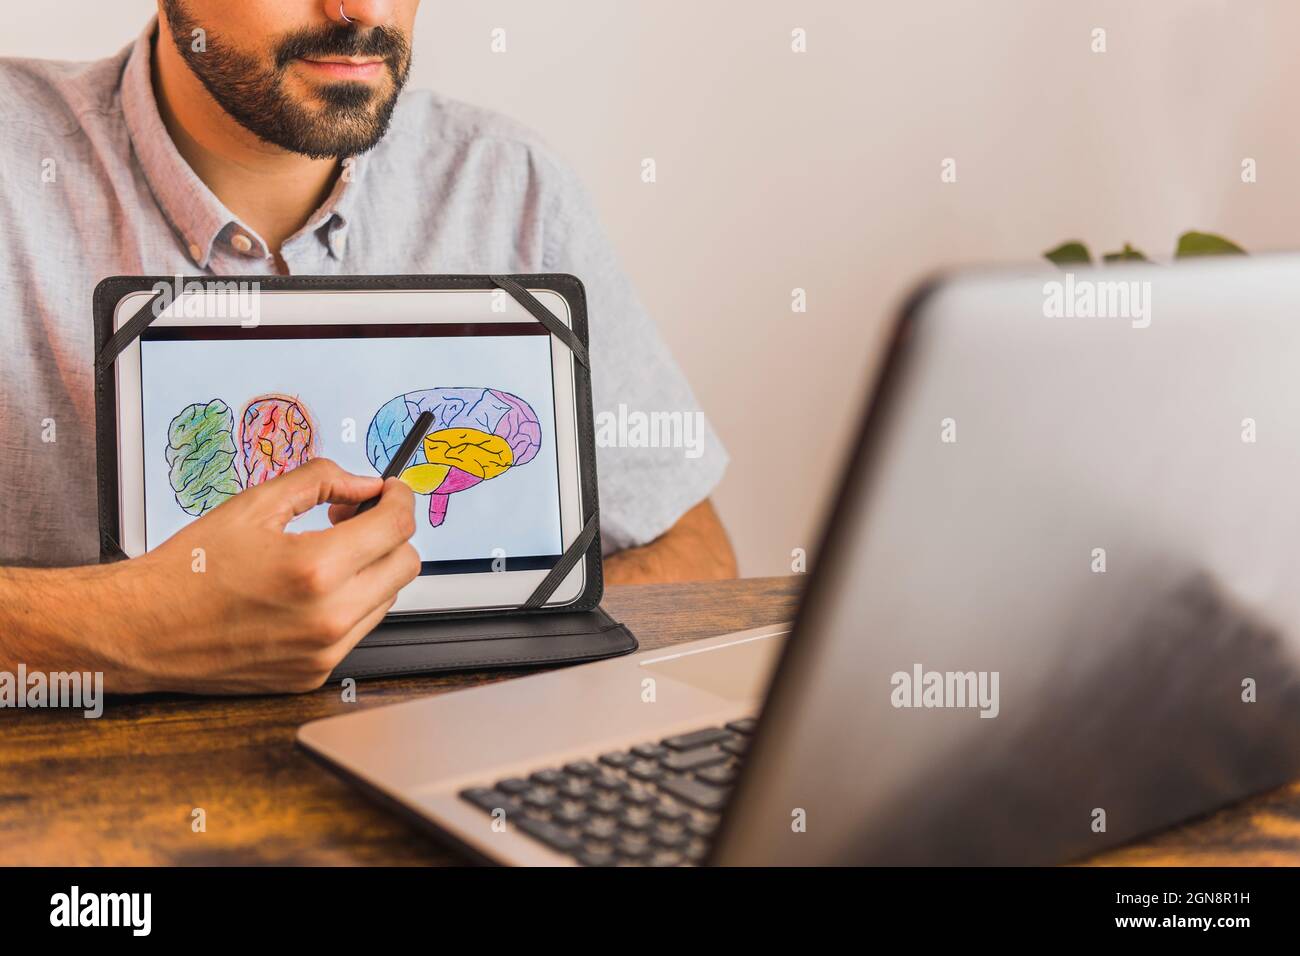 Male mental health professional showing brain diagram on digital tablet during online therapy Stock Photo